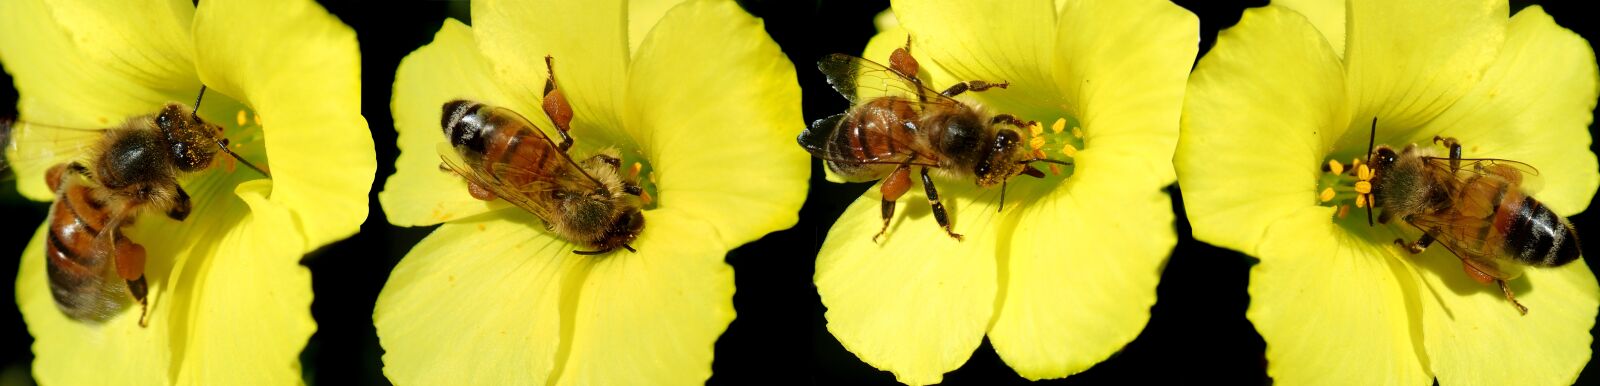 Olympus TG-5 sample photo. Bees, pollination, pollinate photography